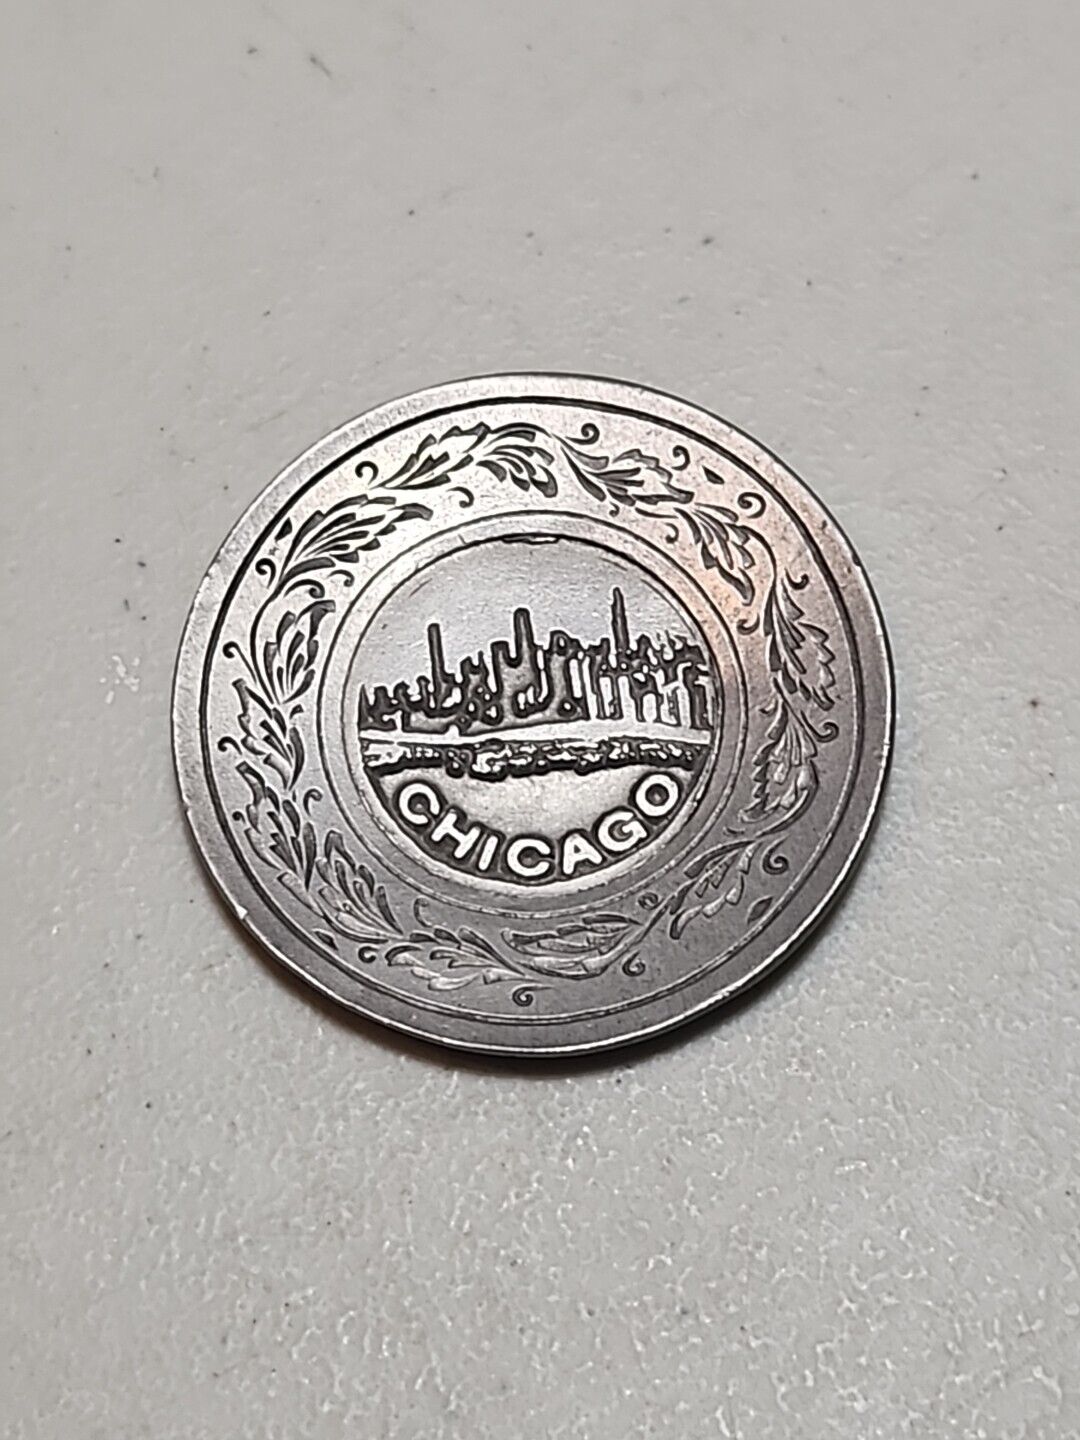 Chicago 1984 Spoontiques Inc Collectors Mini Pewter Plate